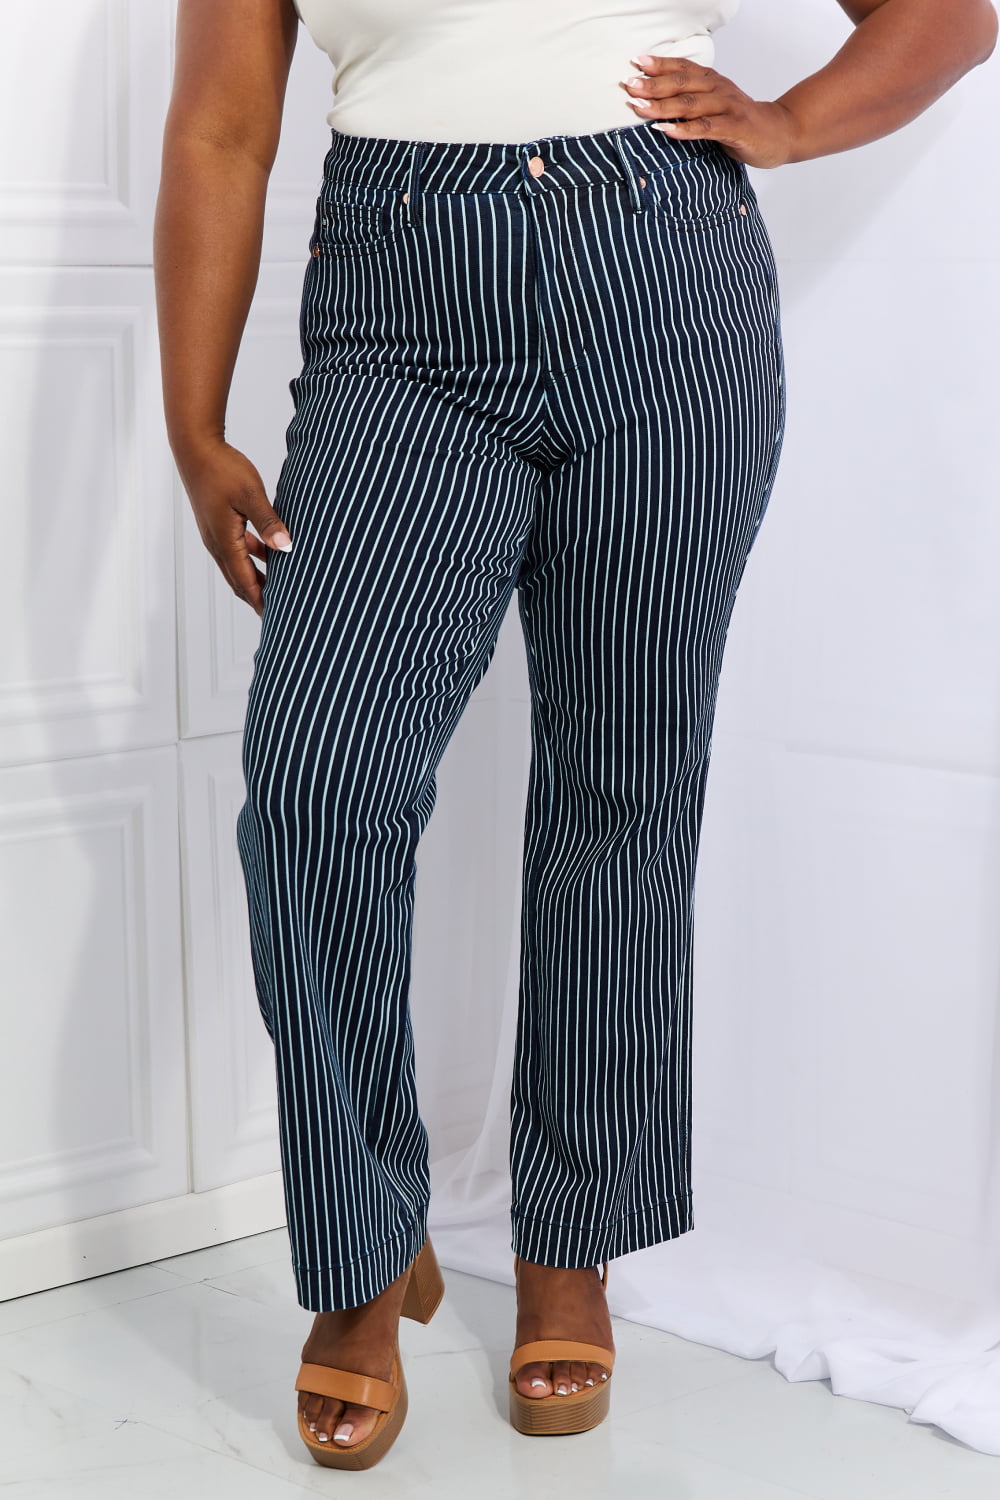 Chambray Stripe Trousers | Apricot Clothing